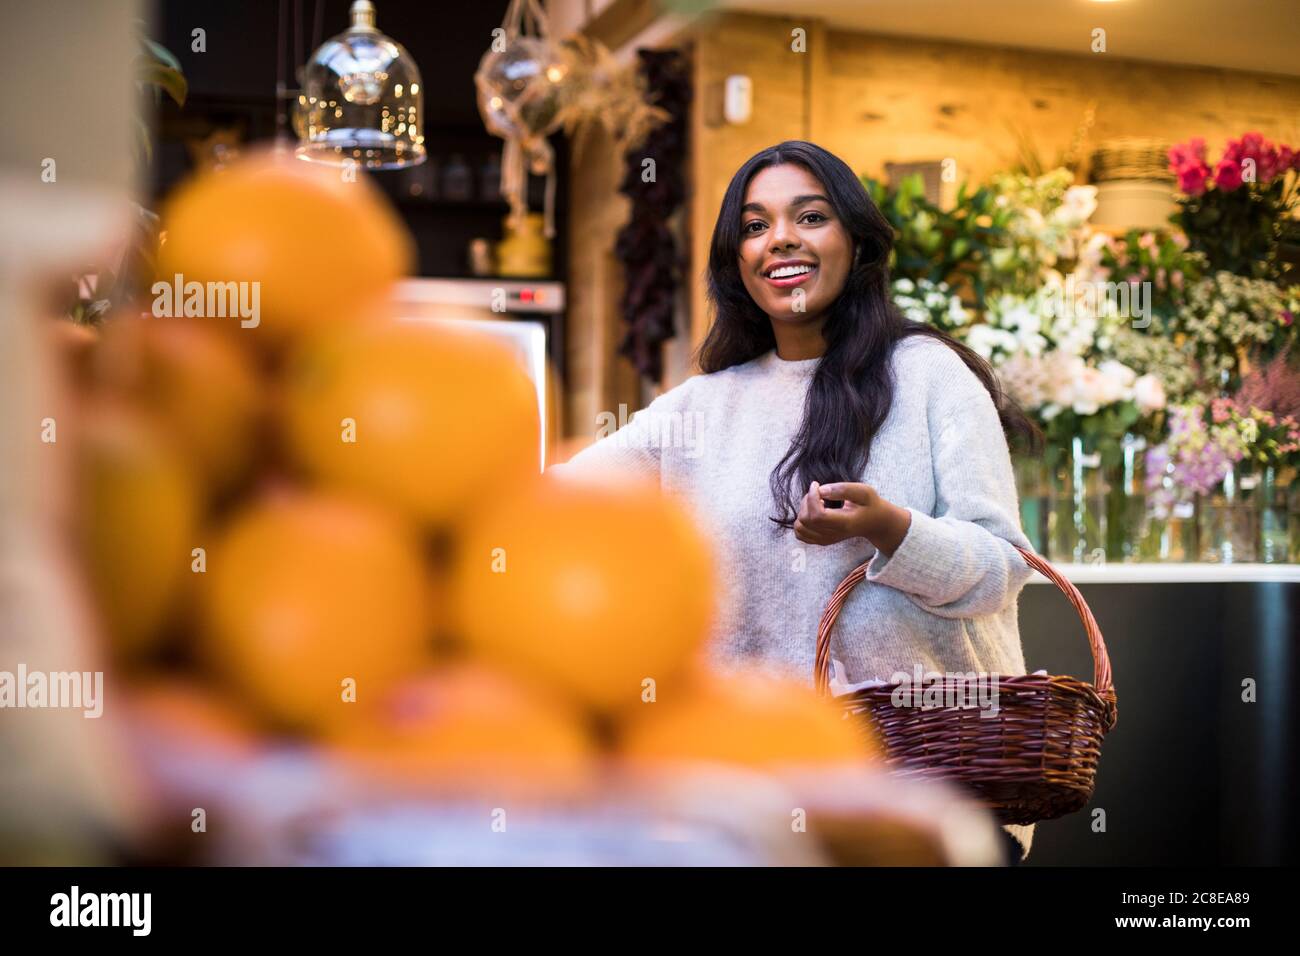 Happy young woman carrying wicker basket while shopping in grocery store Stock Photo